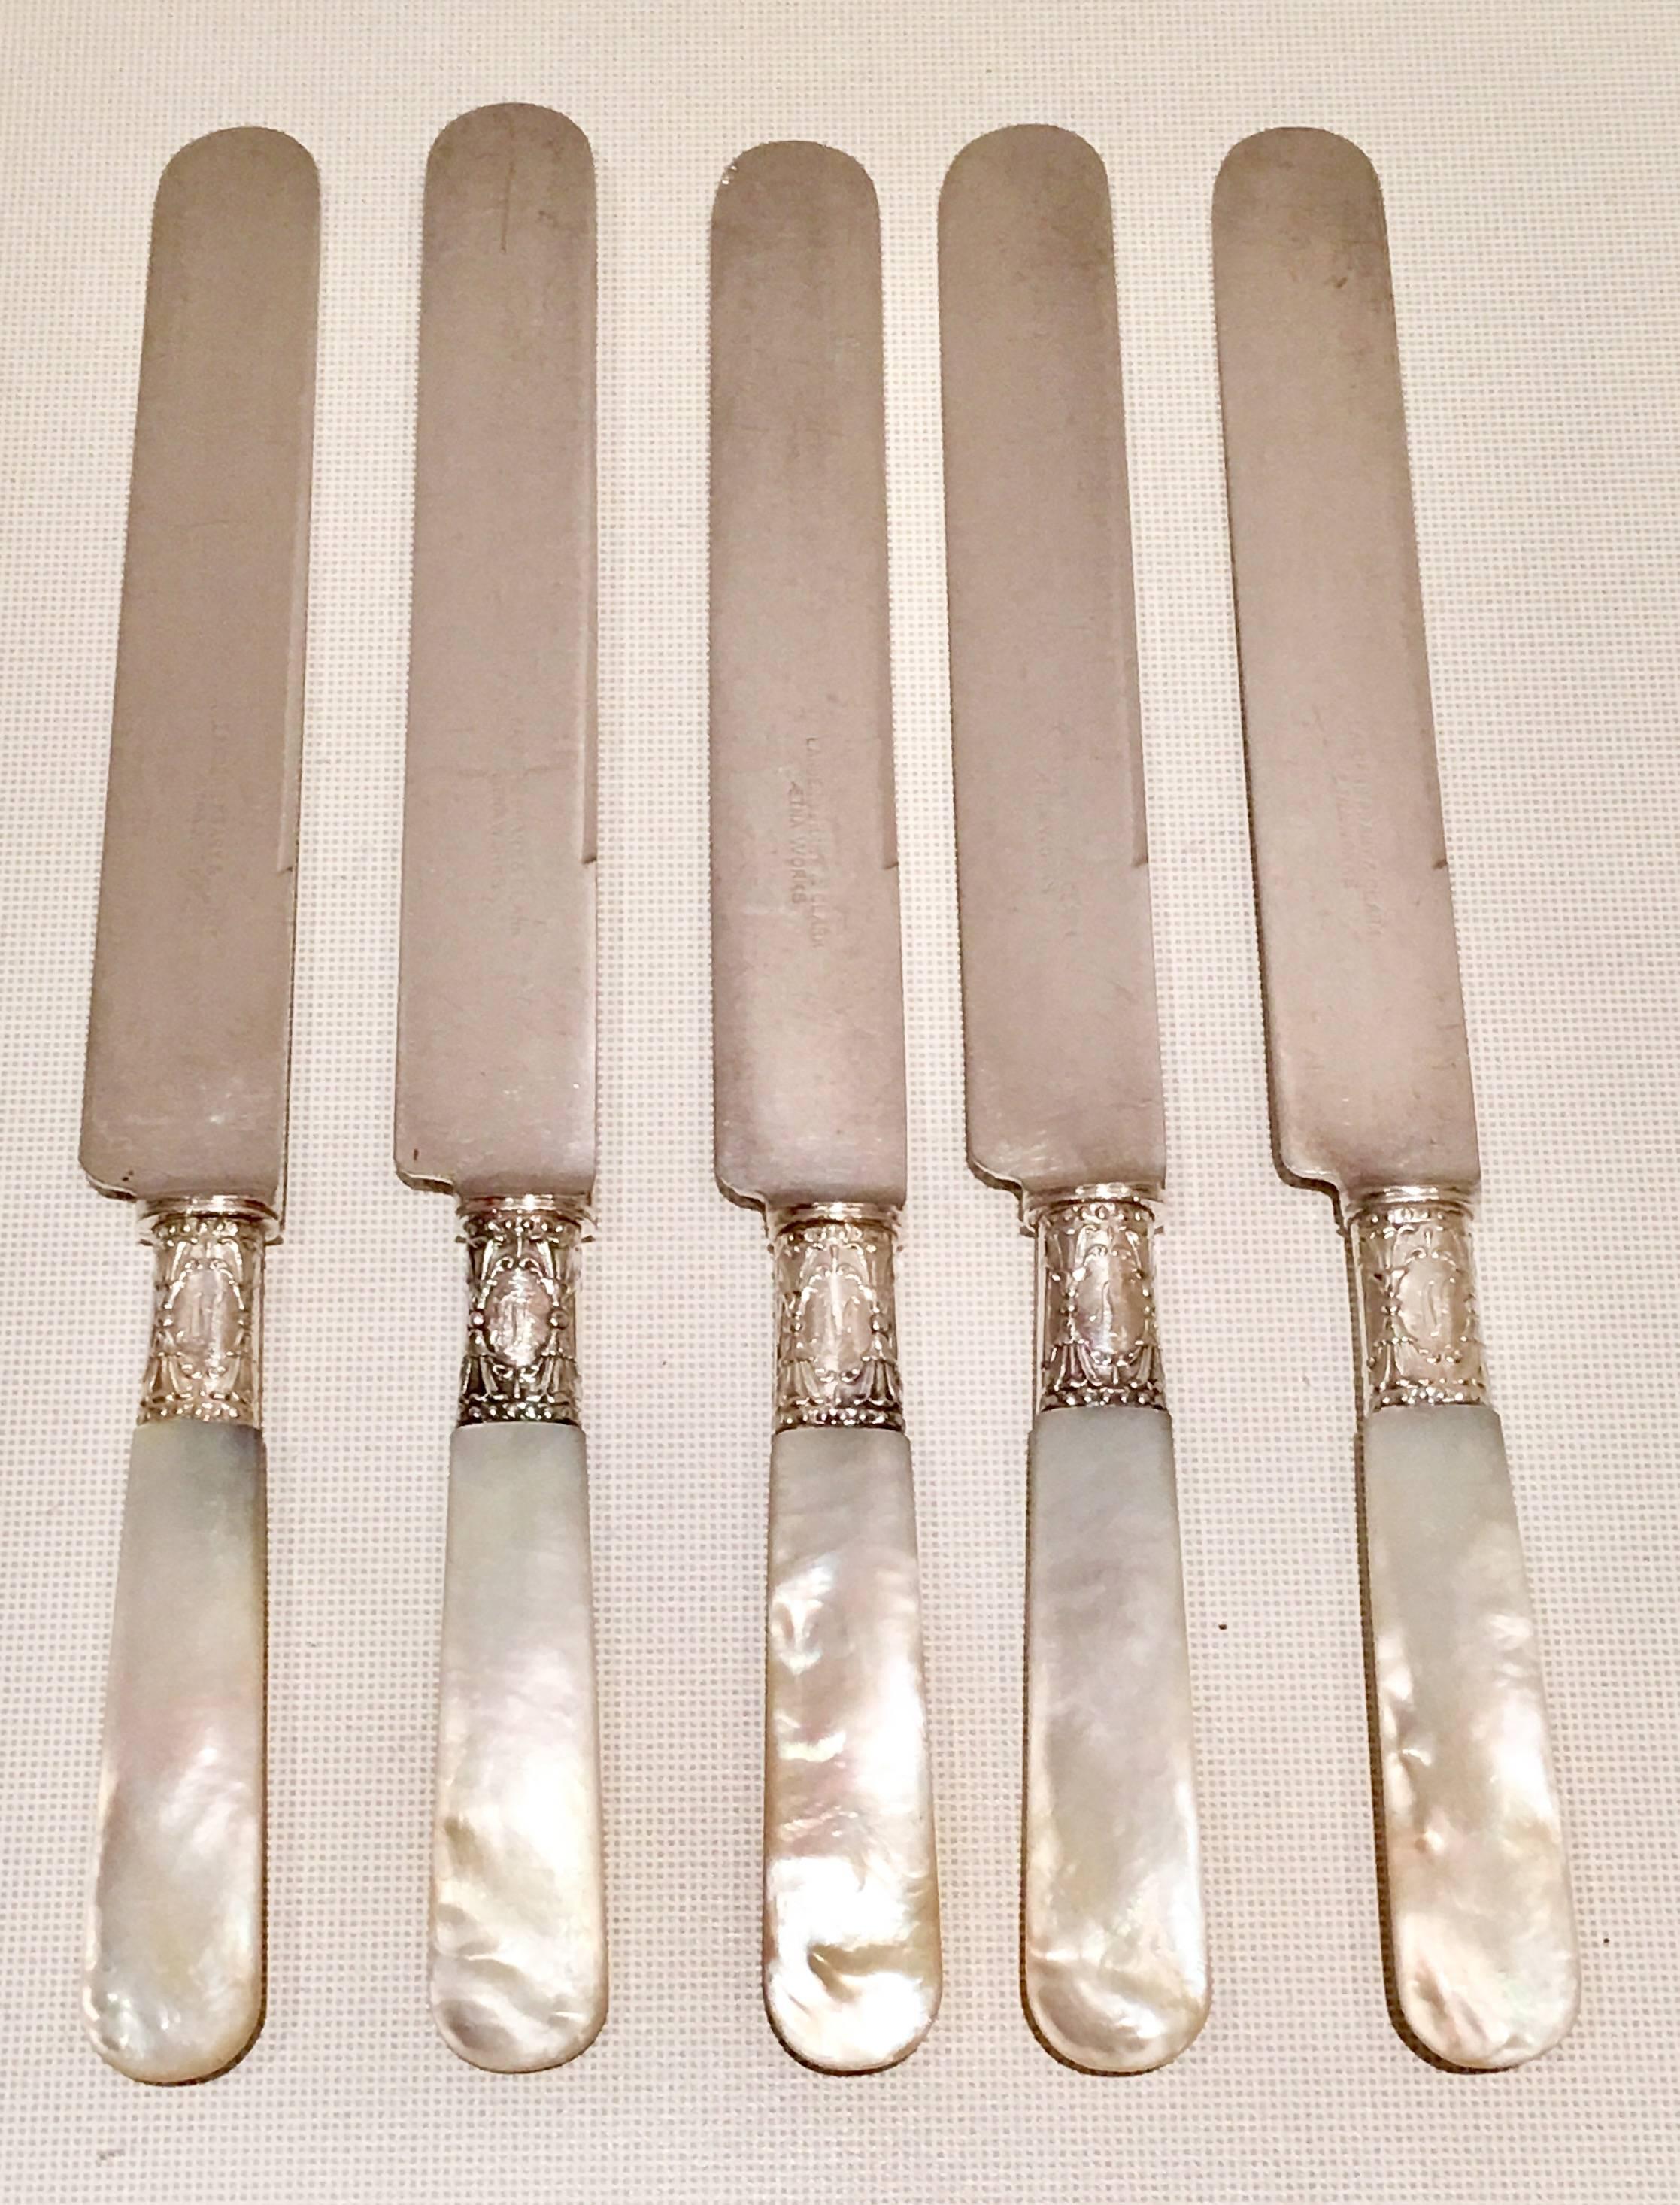 Early 20th century sterling silver and mother-of-pearl handle art nouveau flatware, 21 pieces. Set includes, five dinner knives, six dessert knives, four dinner/dessert forks and six cheese/spreader knives. Each piece is signed and carries the